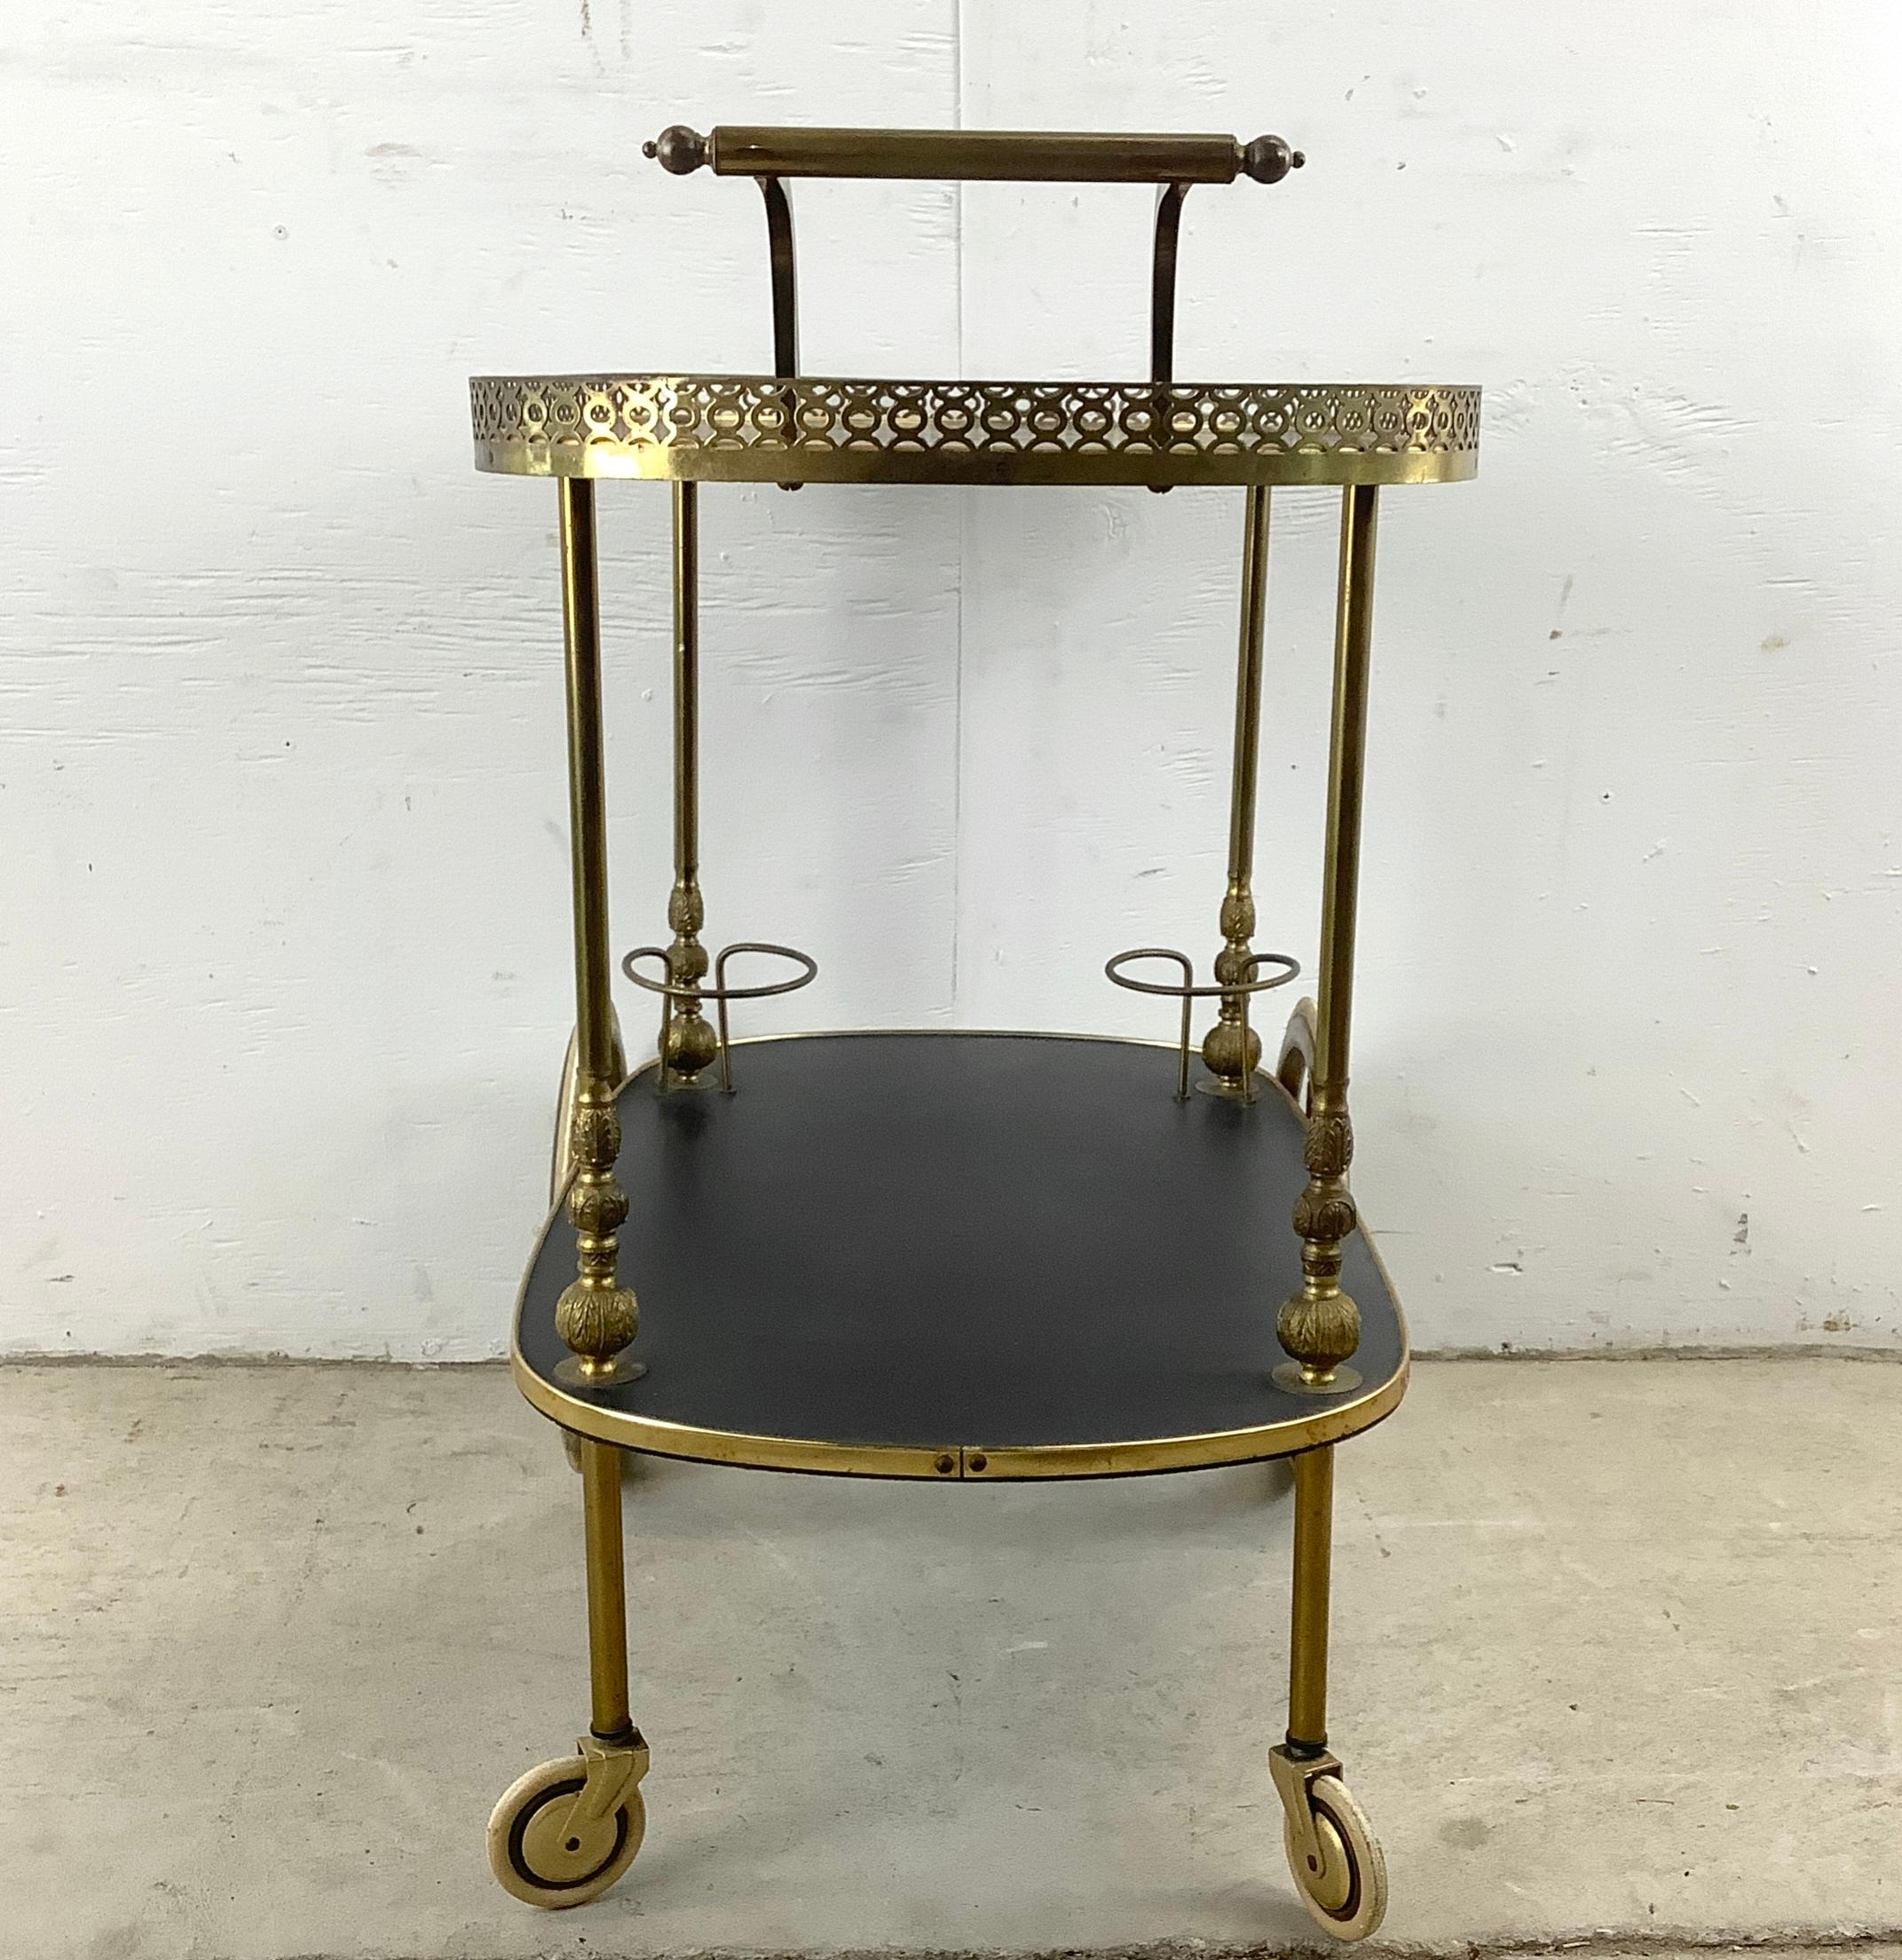 Elevate your home with this ornate, vintage tea cart, reminiscent of lavish afternoons and refined hospitality. This enchanting serving cart, resplendent in its golden hues and detailed decorative tray, exudes the charm of the high tea elegance of